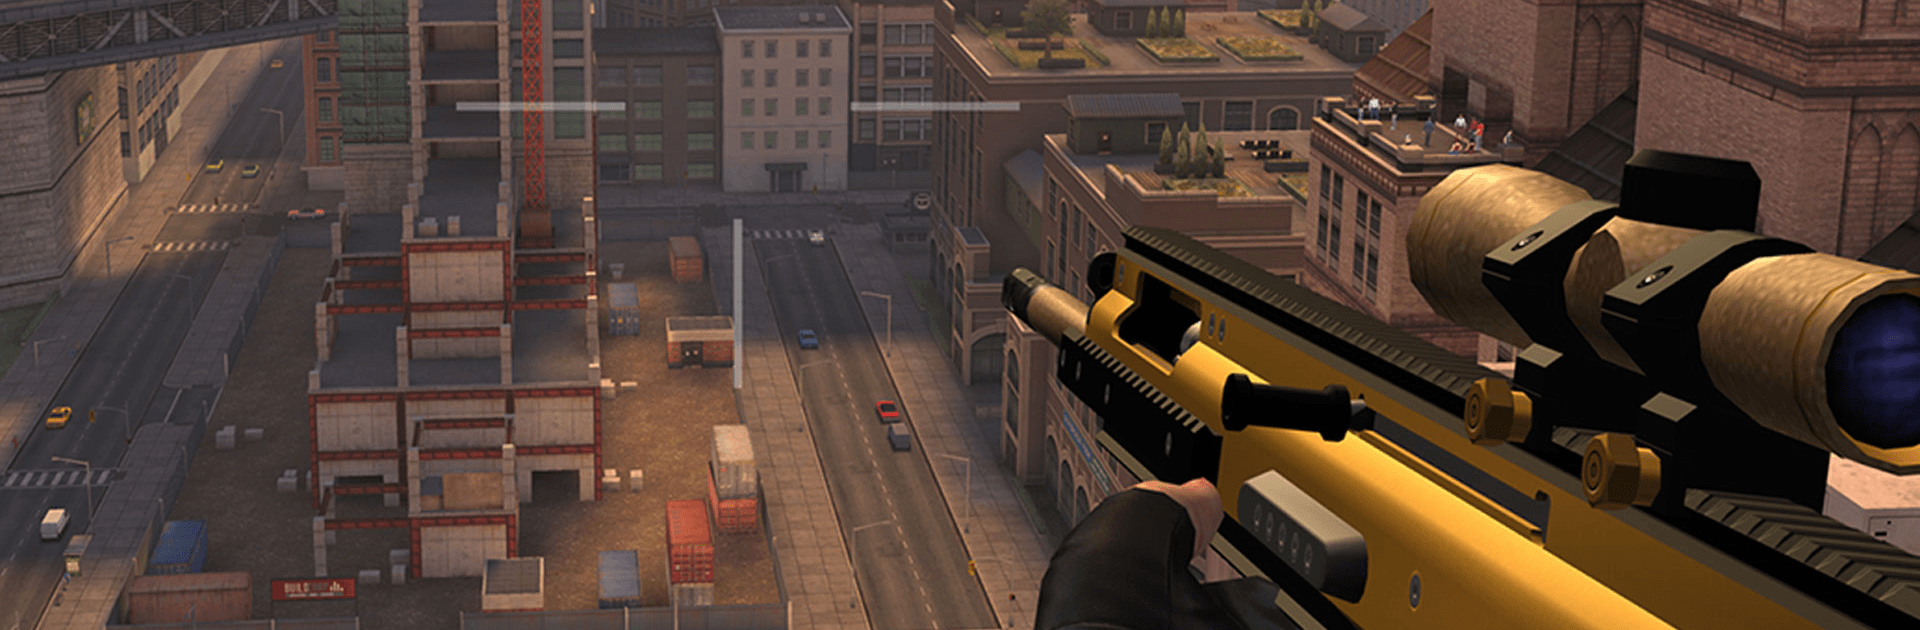 Download and Play Pure Sniper Gun Shooter Games on PC and Mac (Emulator).